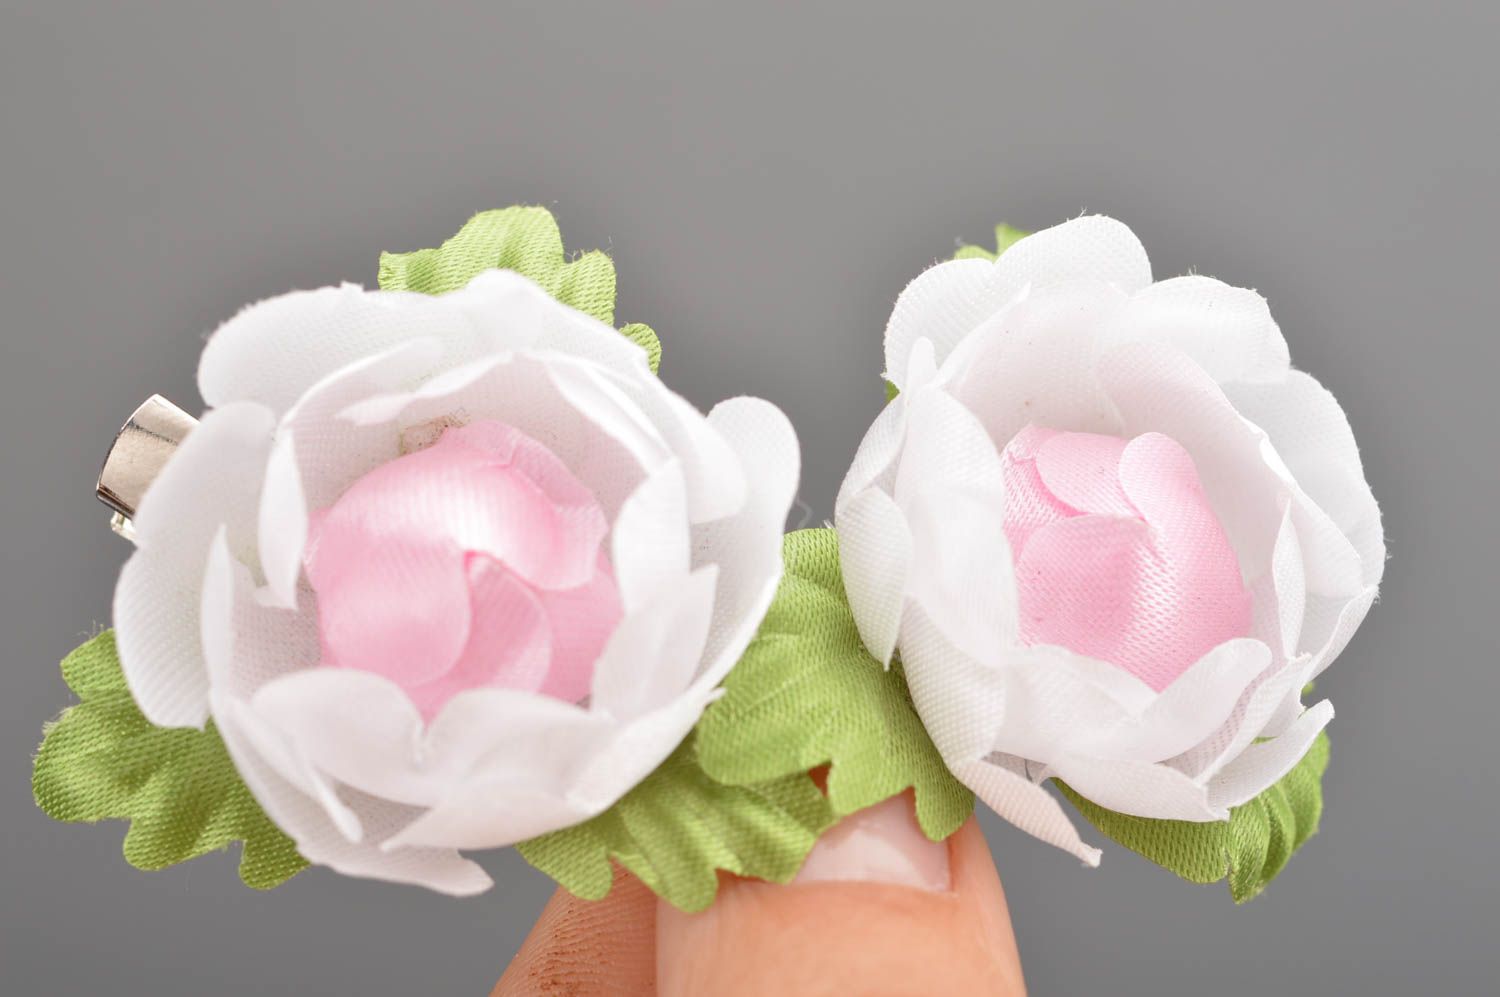 Handmade small tender pink flower hair clips made of fabric set of 2 pieces photo 3